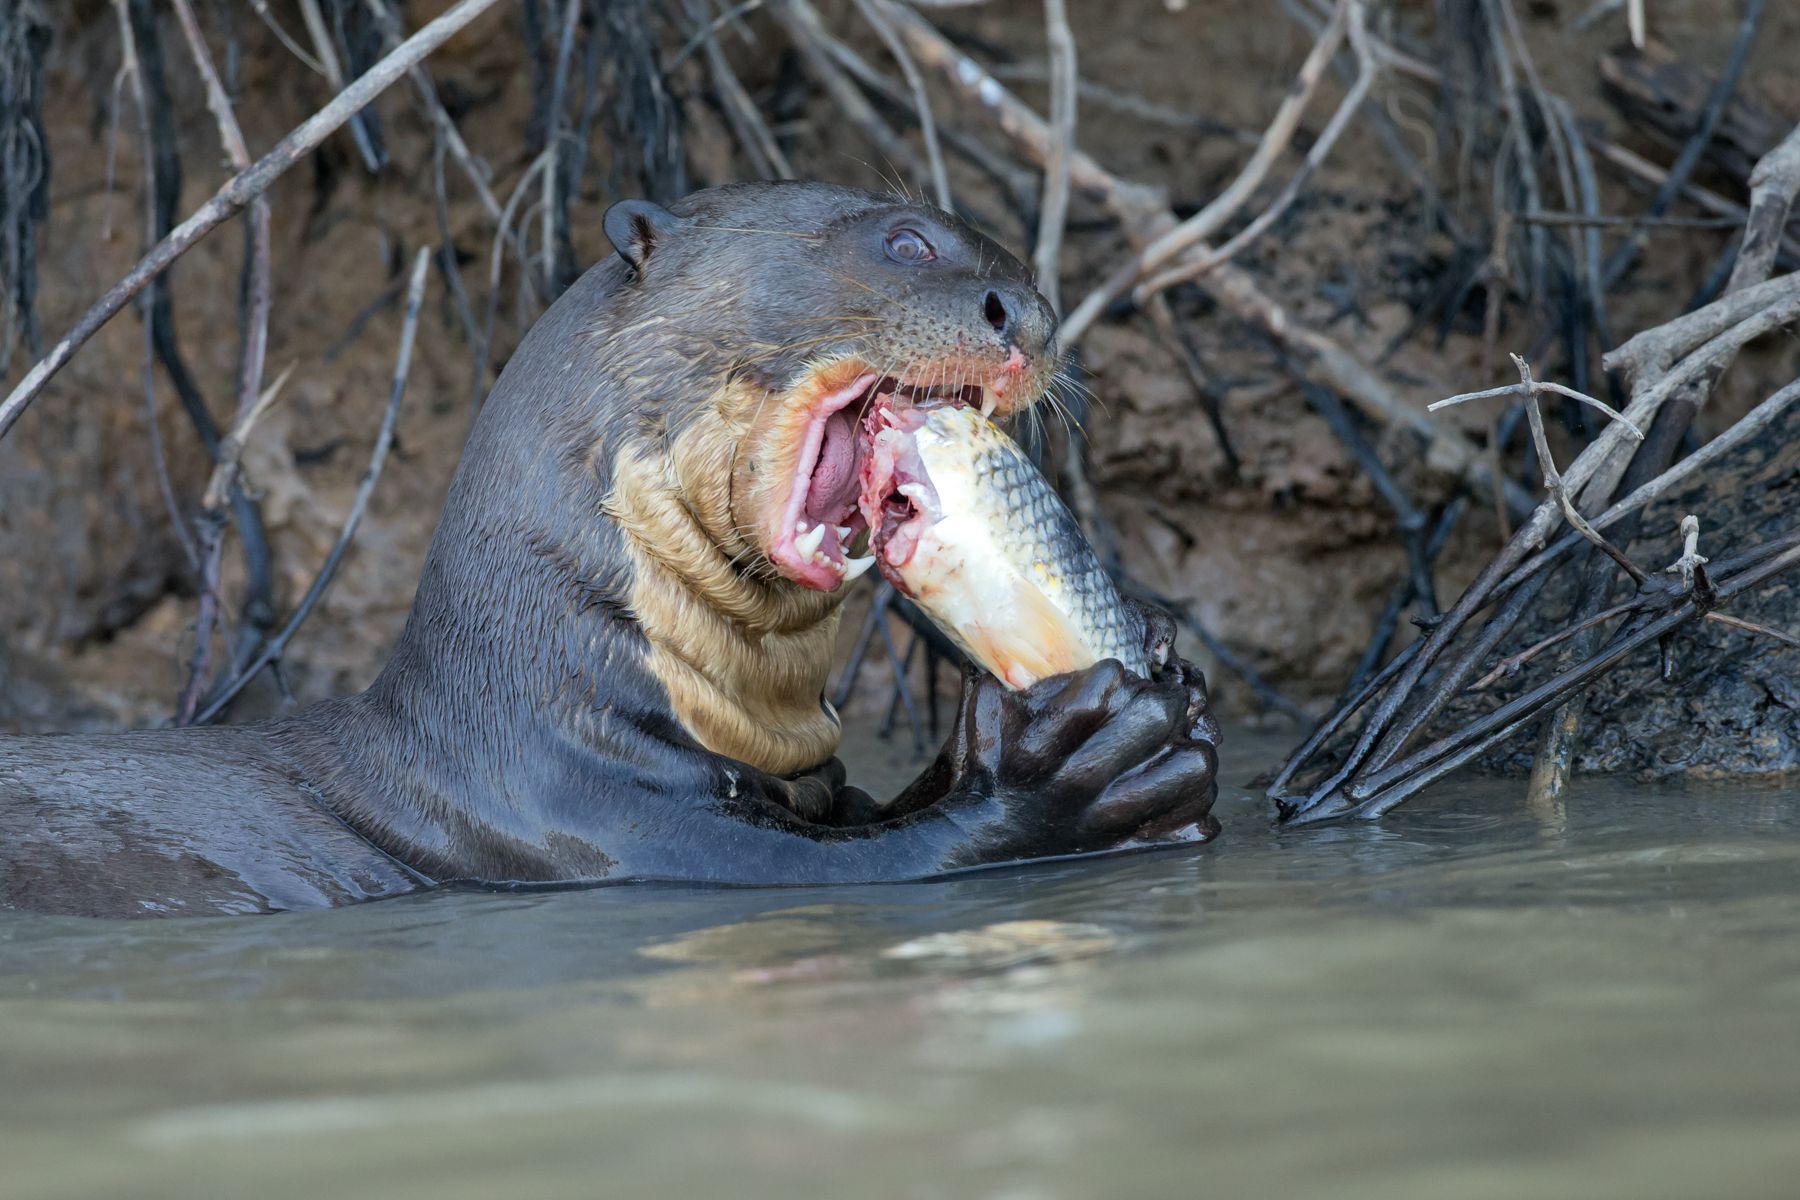 When a Giant Otter crunches down a fish one can hear the noise from 50 metres!